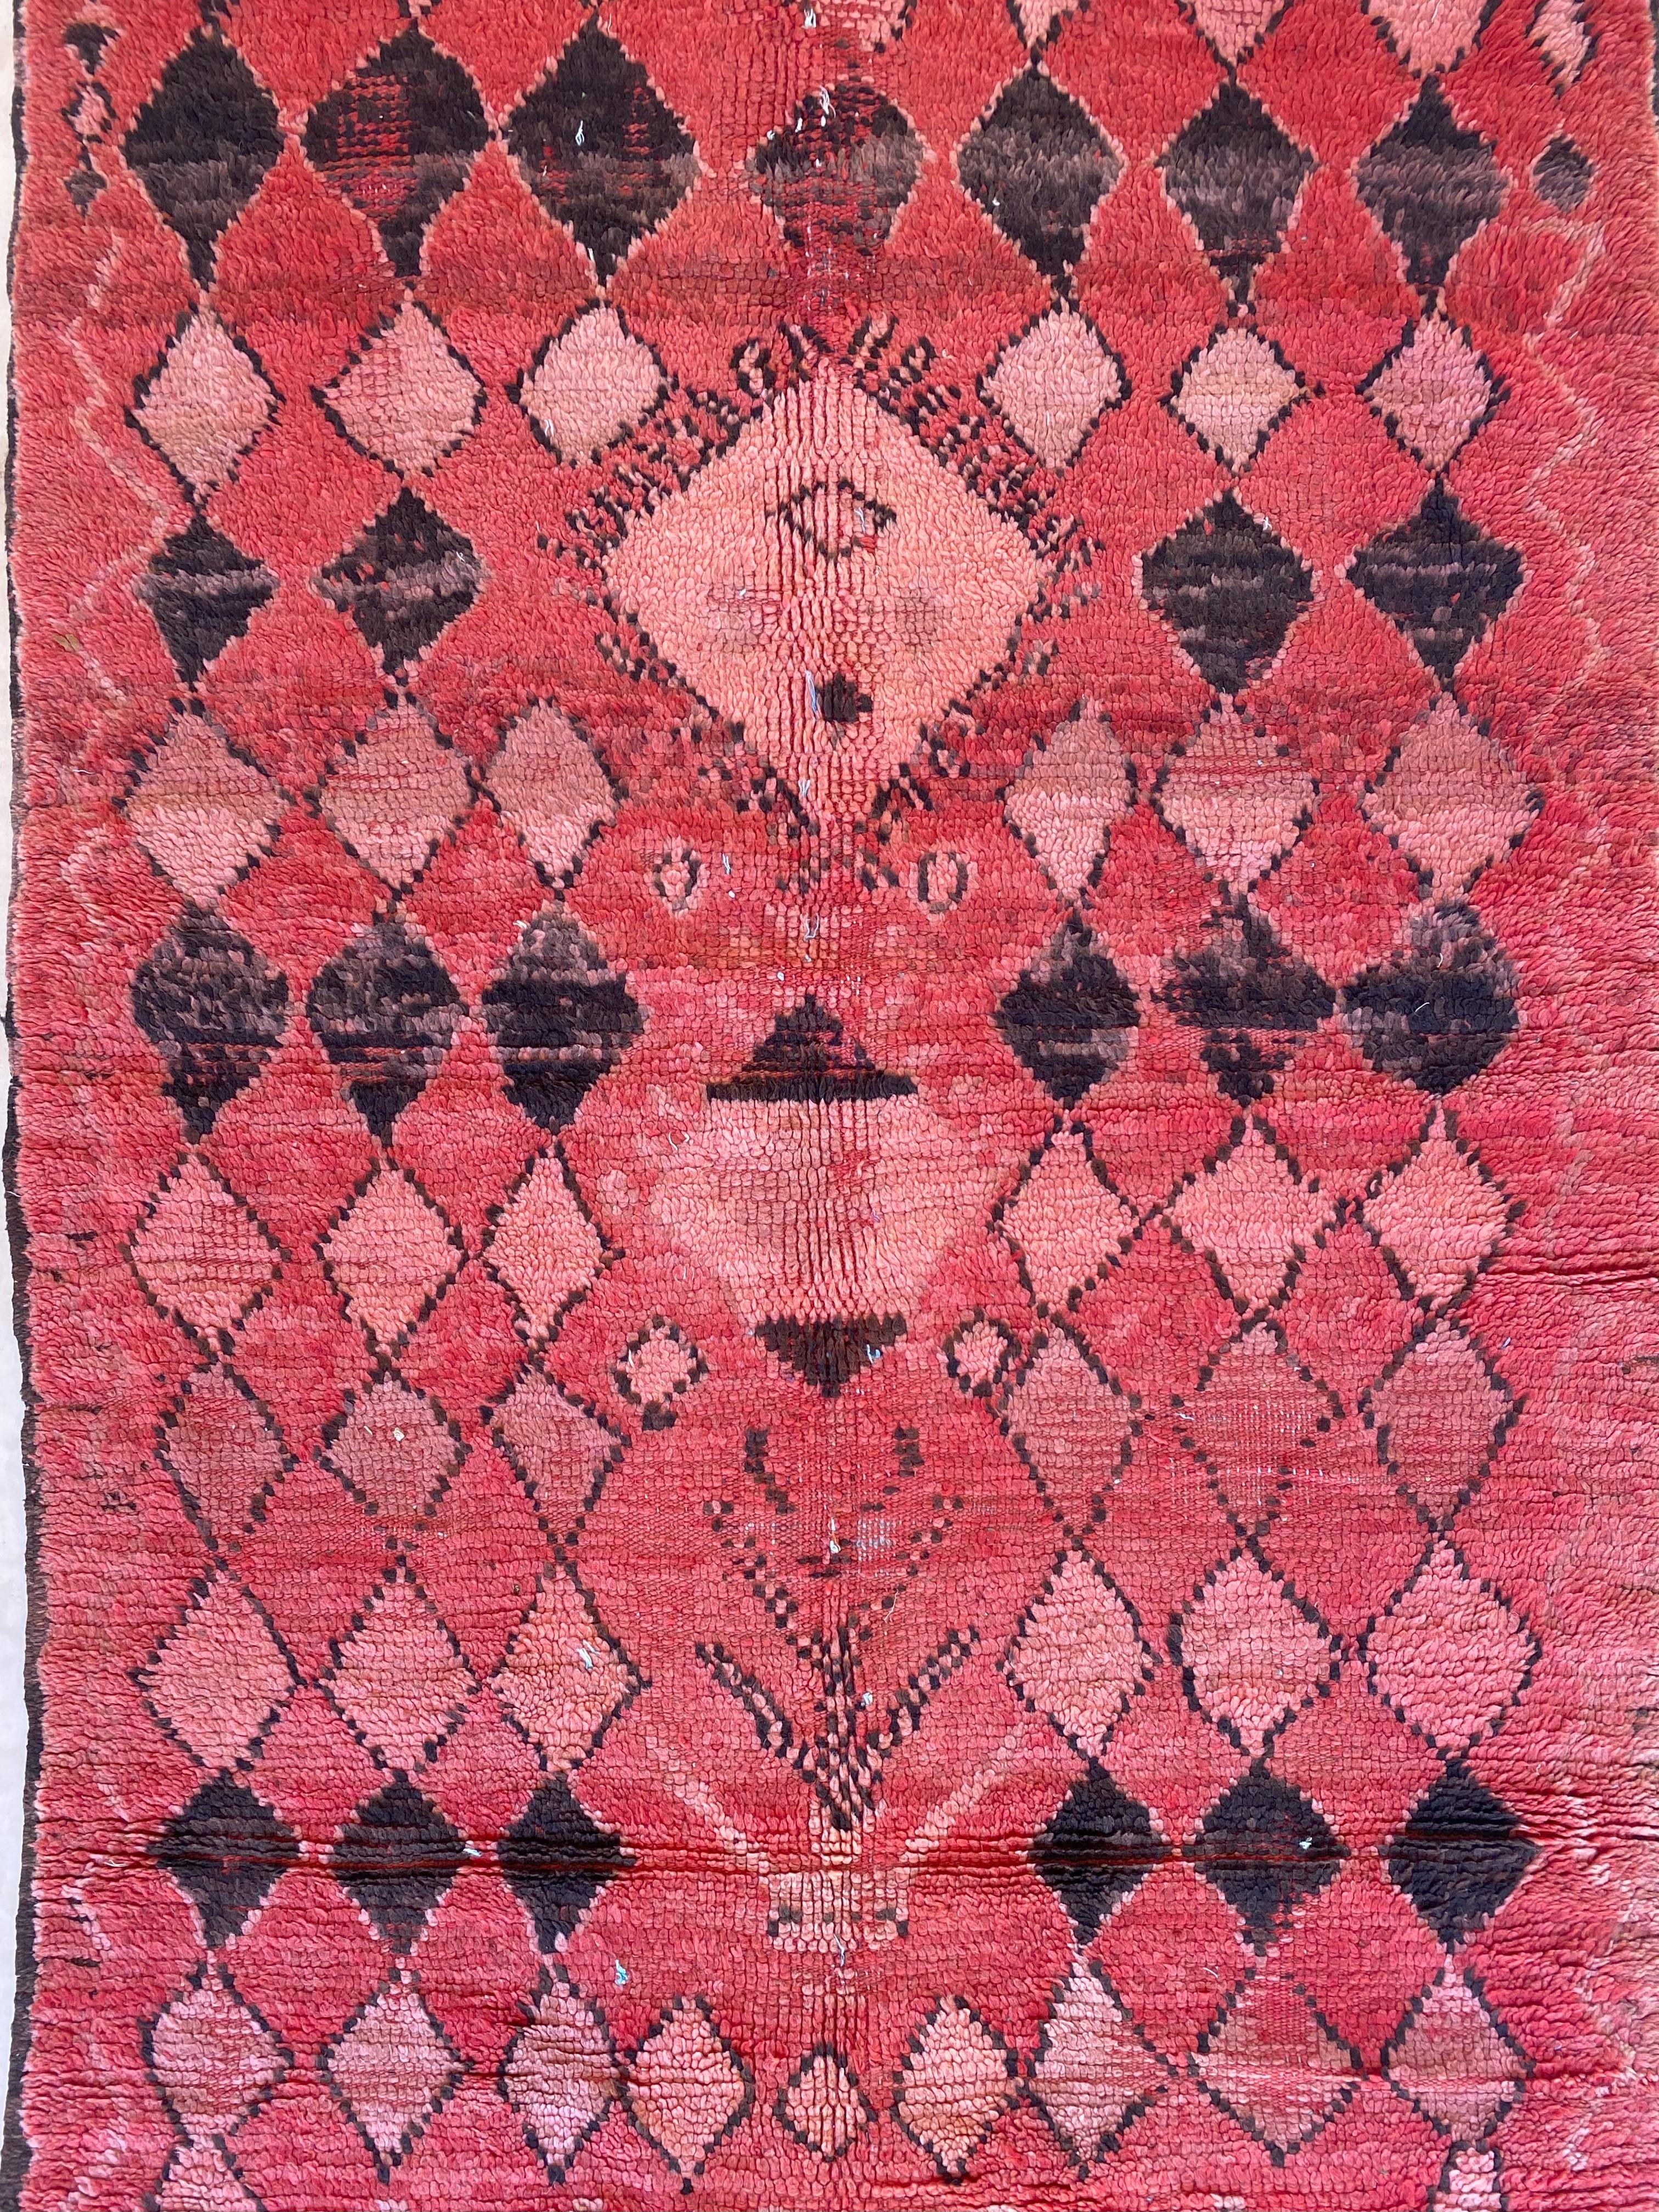 Vintage Moroccan Boujad rug - Red/black/pink - 4.1x11.6feet / 126x354cm In Fair Condition For Sale In Marrakech, MA